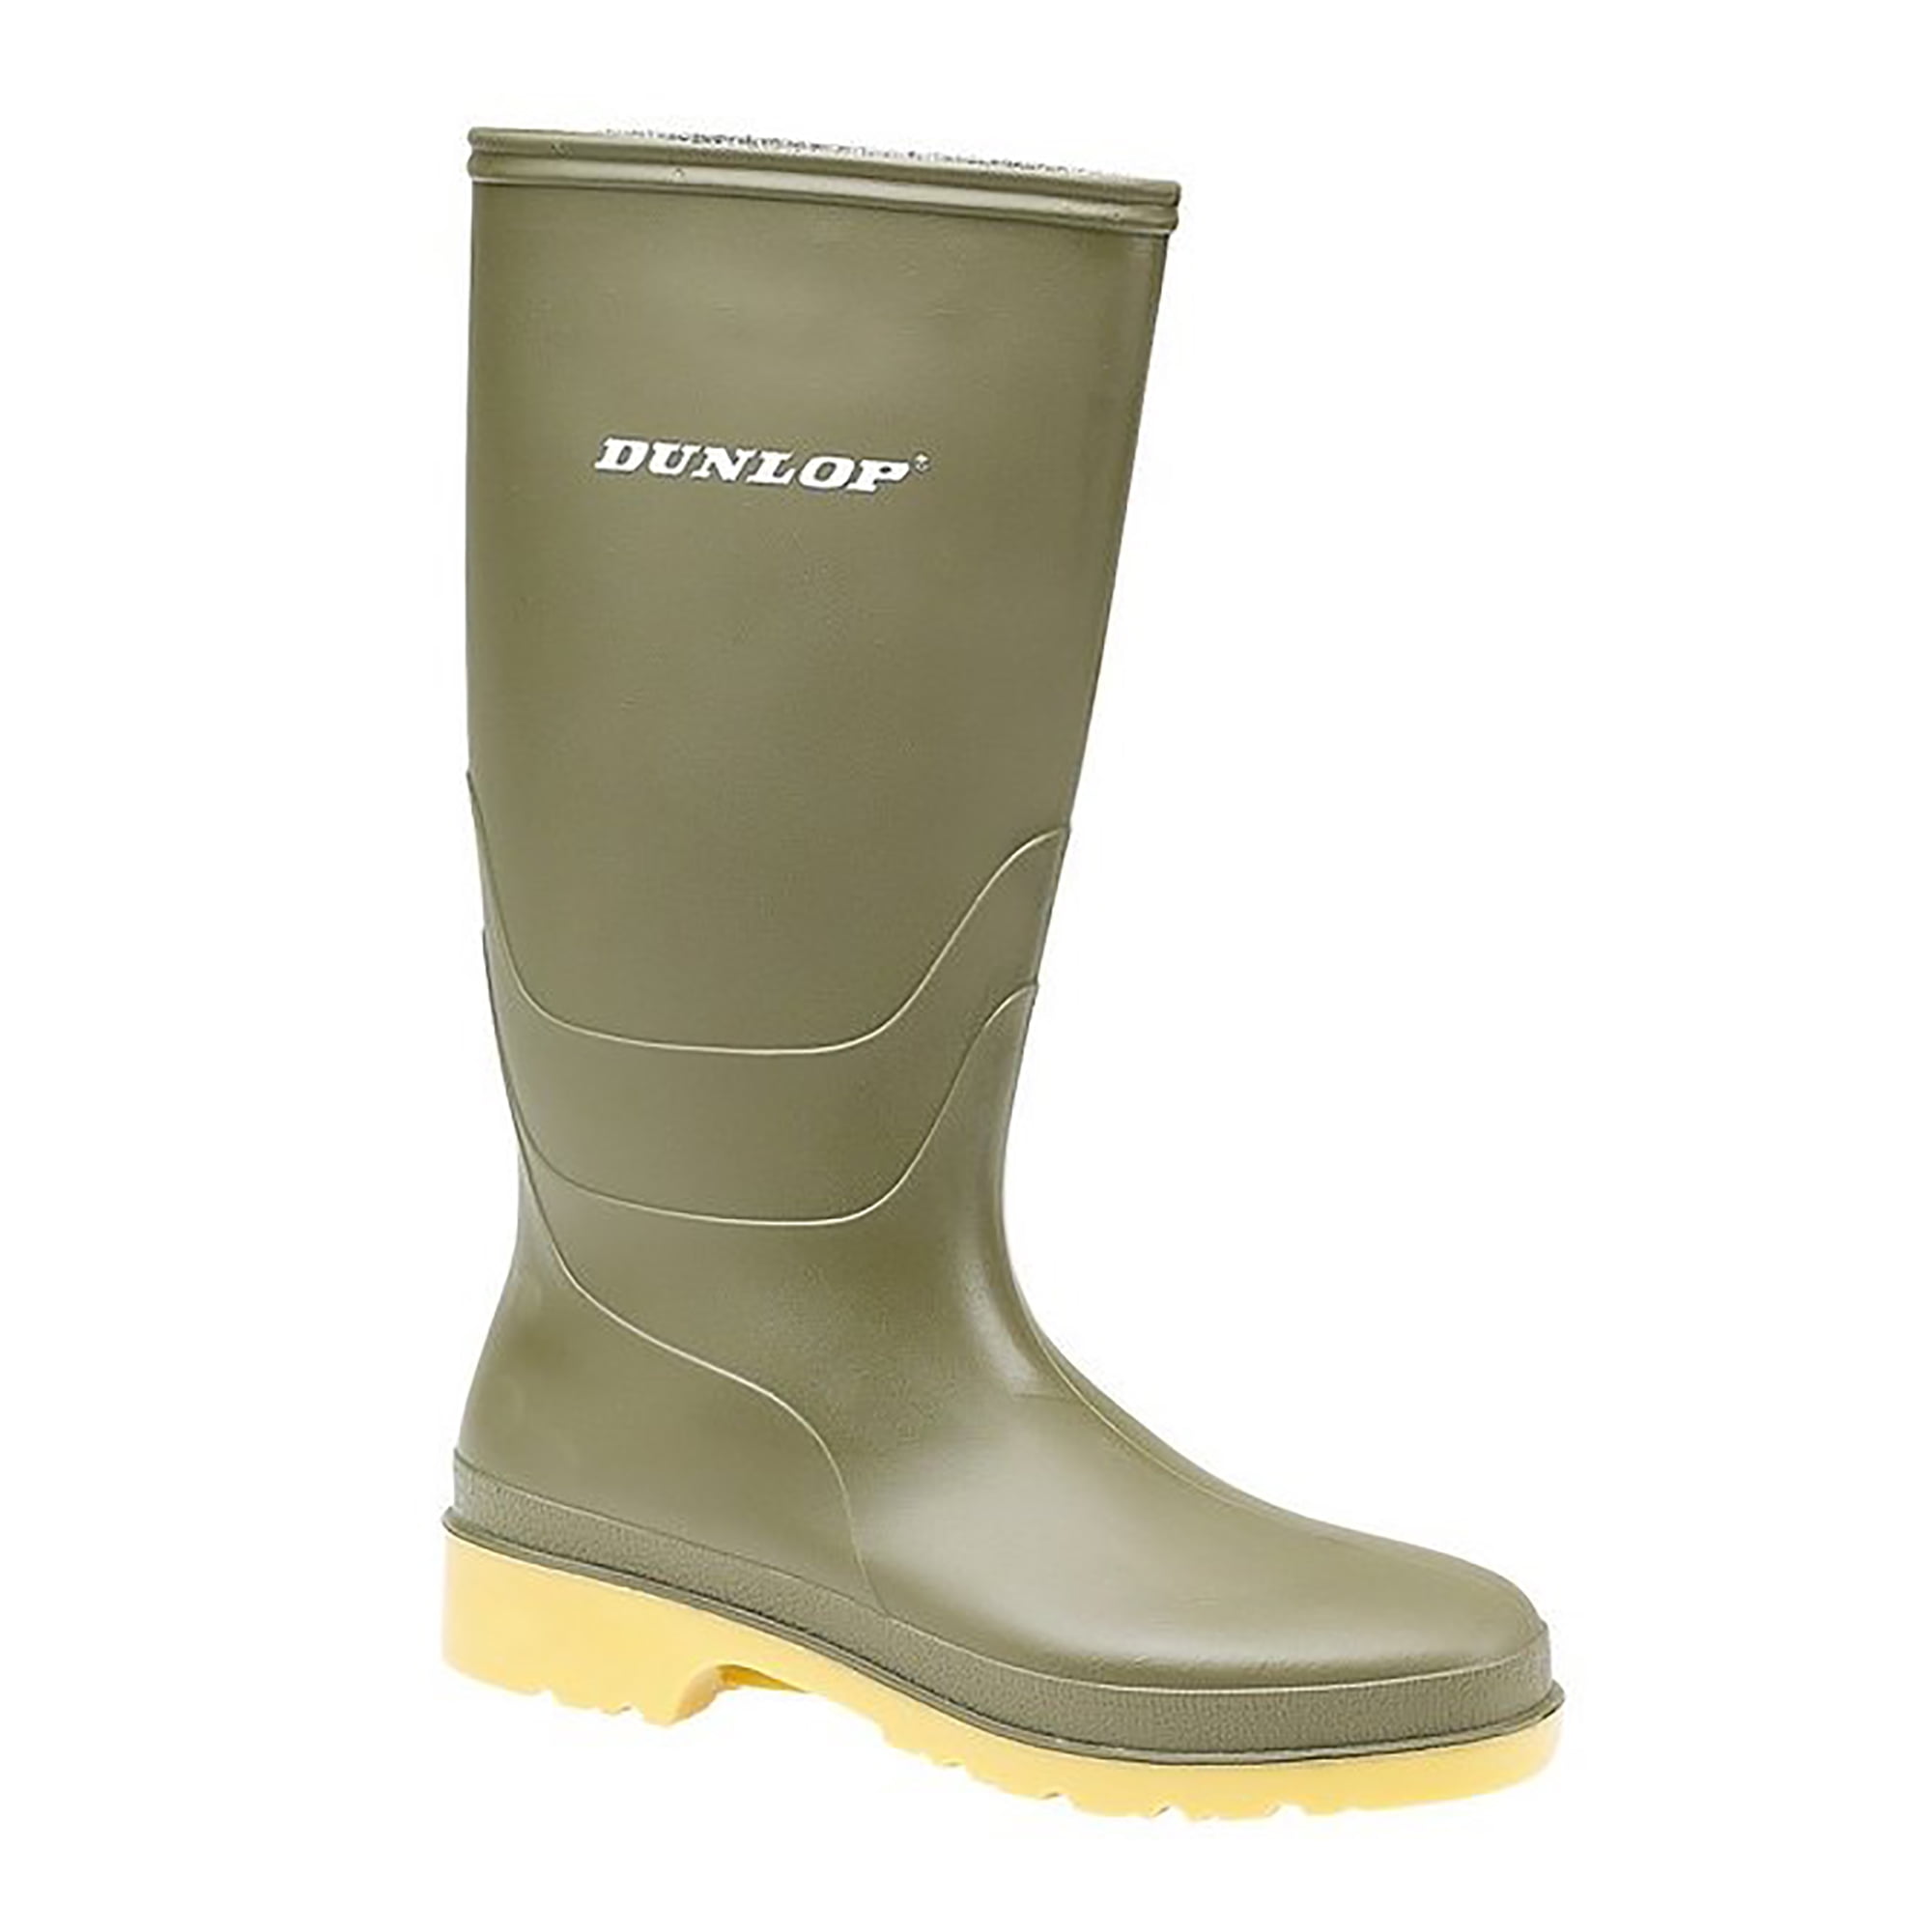 Dunlop Dull Child Wellington Boots Wellies ALL SIZES 